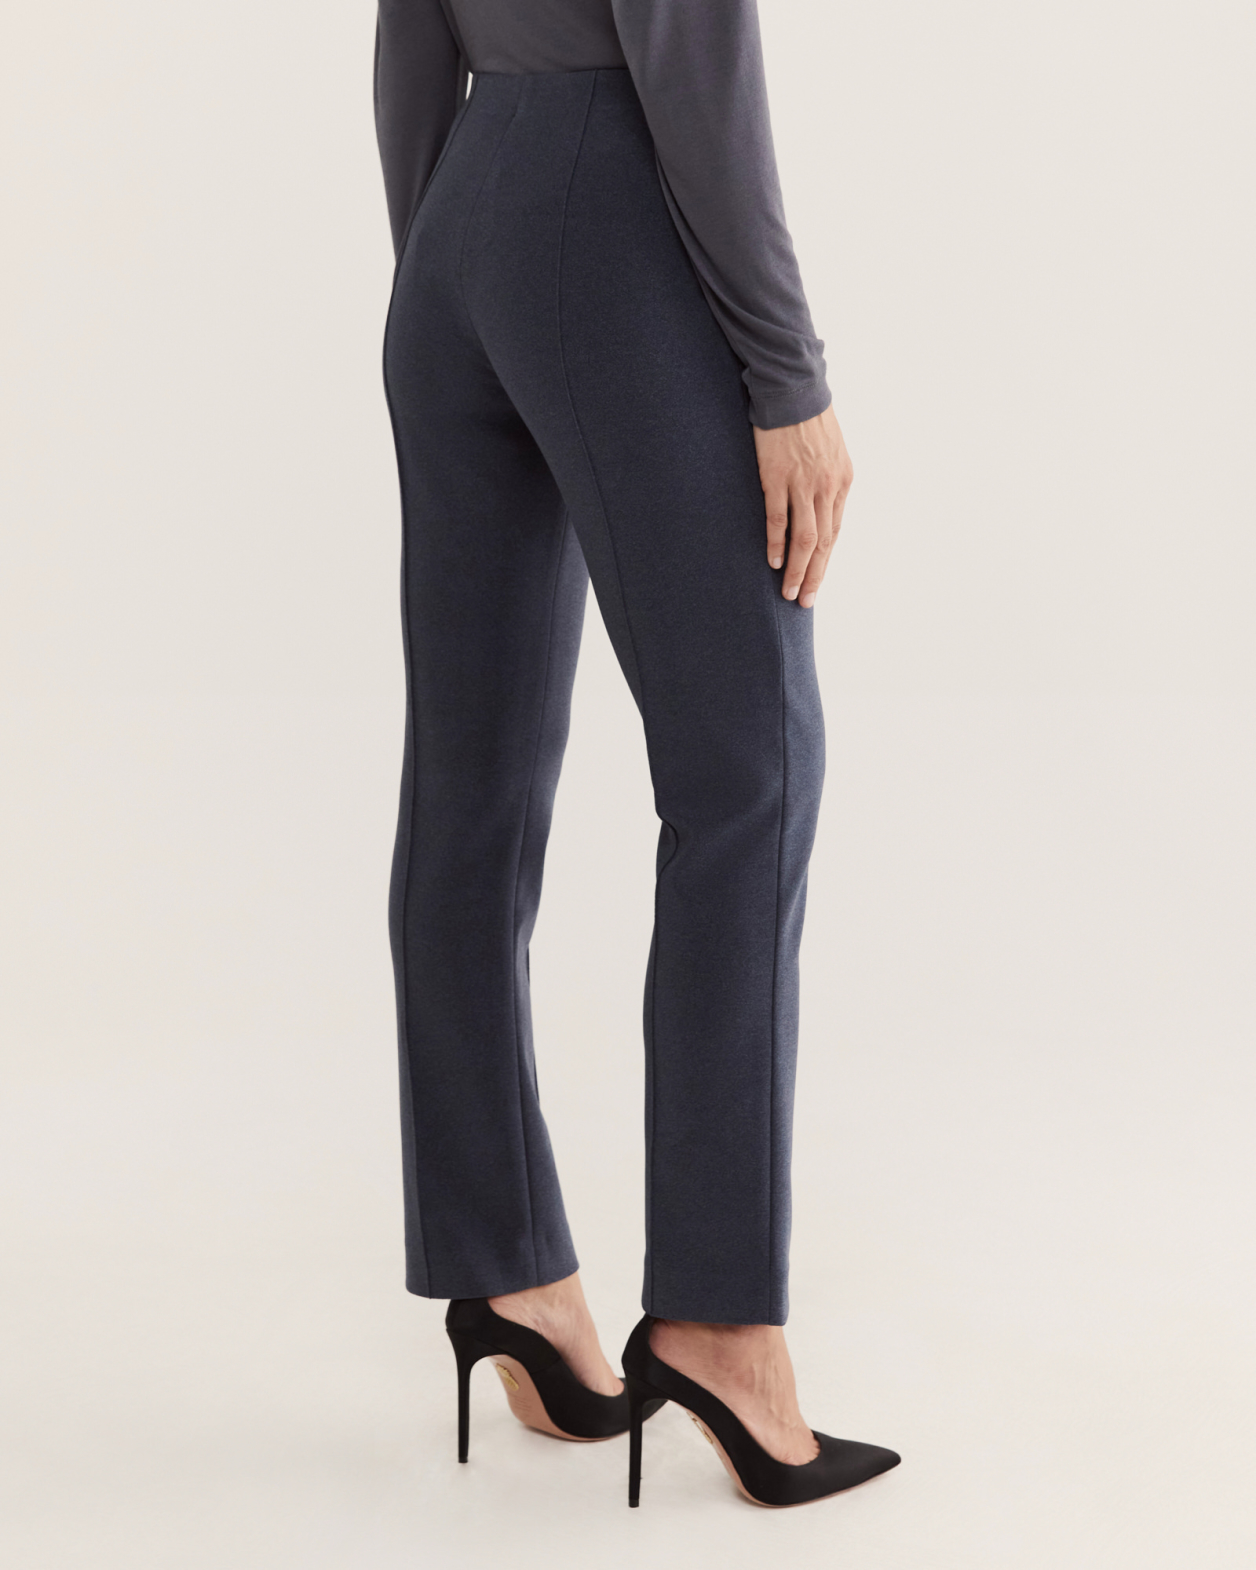 Milla Pull On Pant in CHARCOAL MELANGE